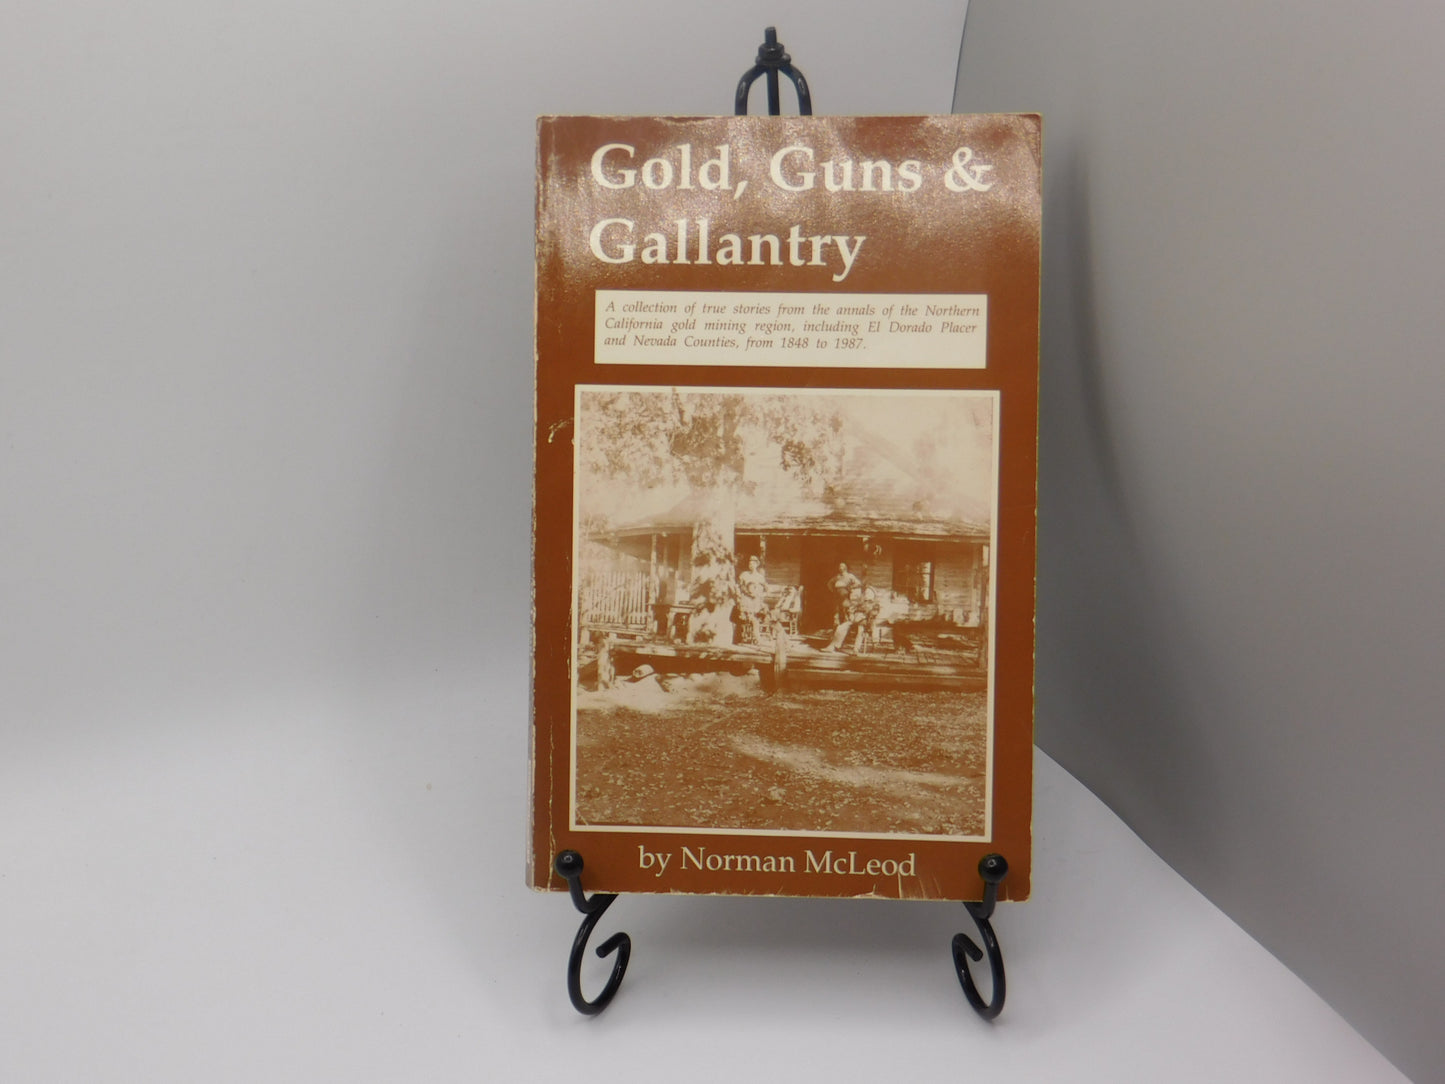 (Signed) Gold, Gun & Gallantry by Norman McLeod